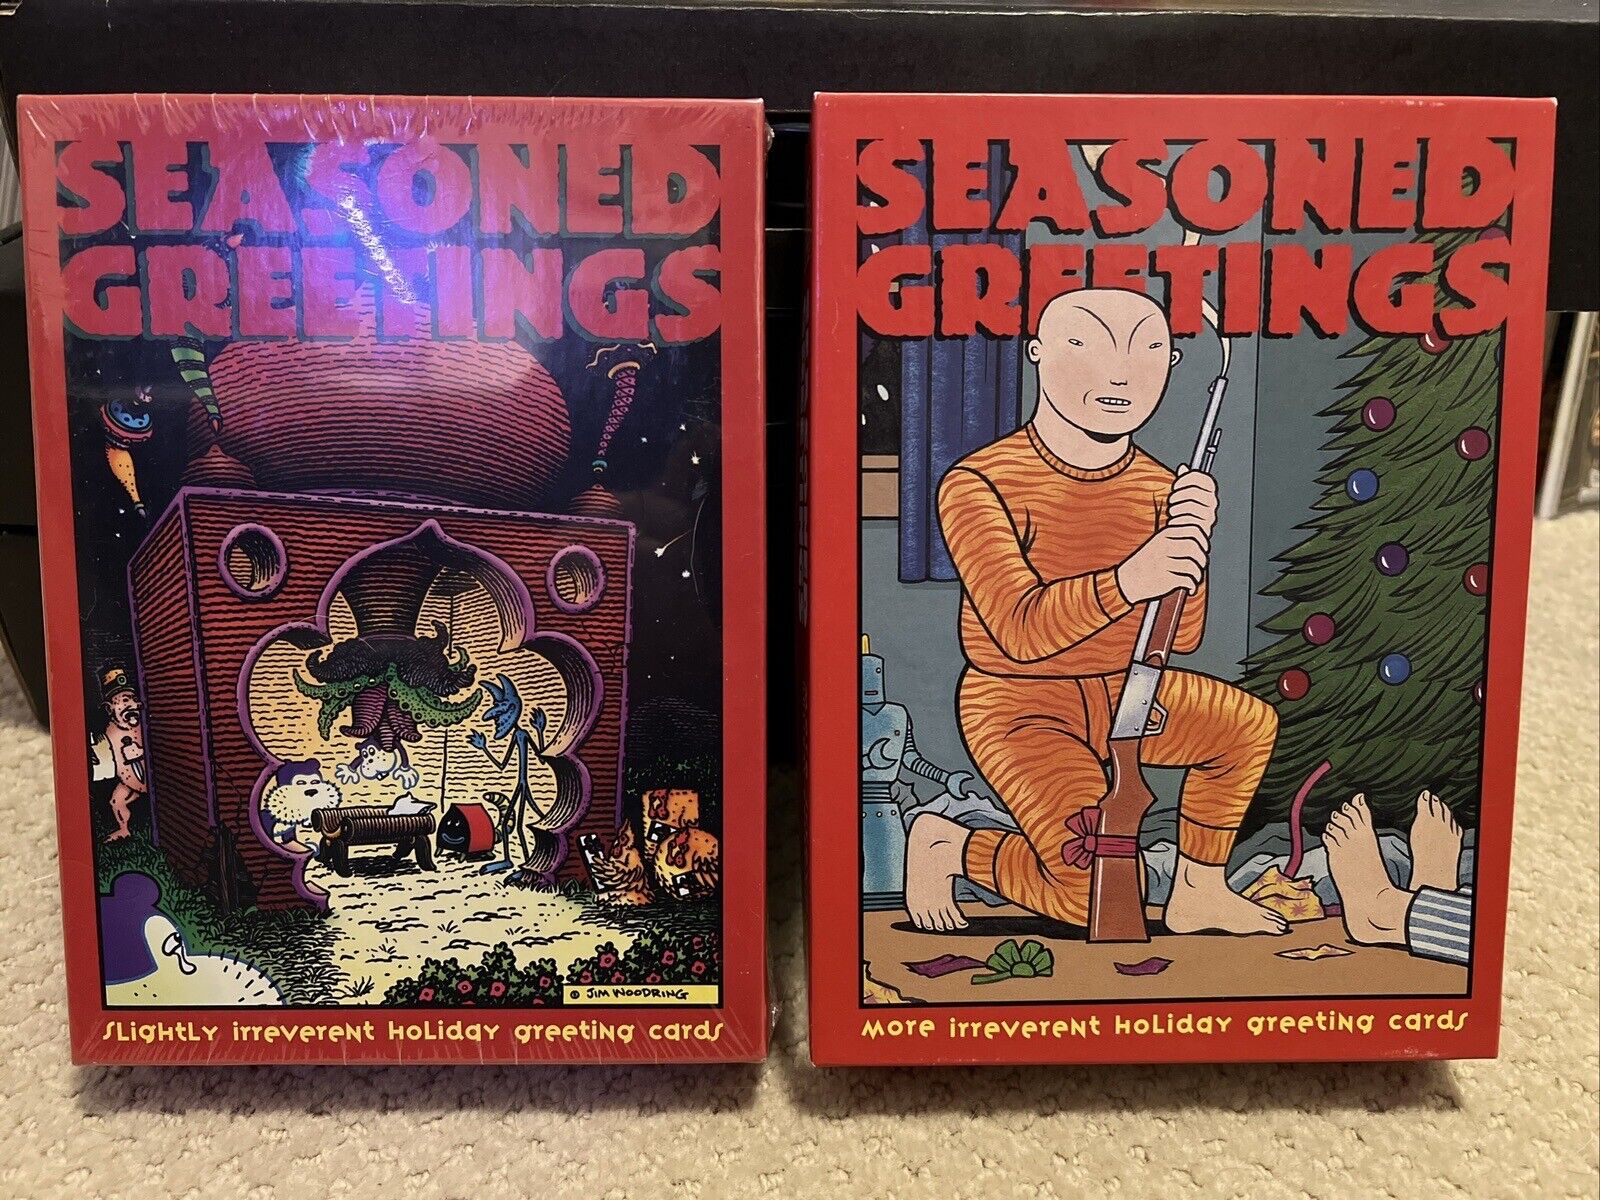 Seasoned Greetings Irreverent Holiday, Greeting Cards. Set 1 and 2. Ultra Rare